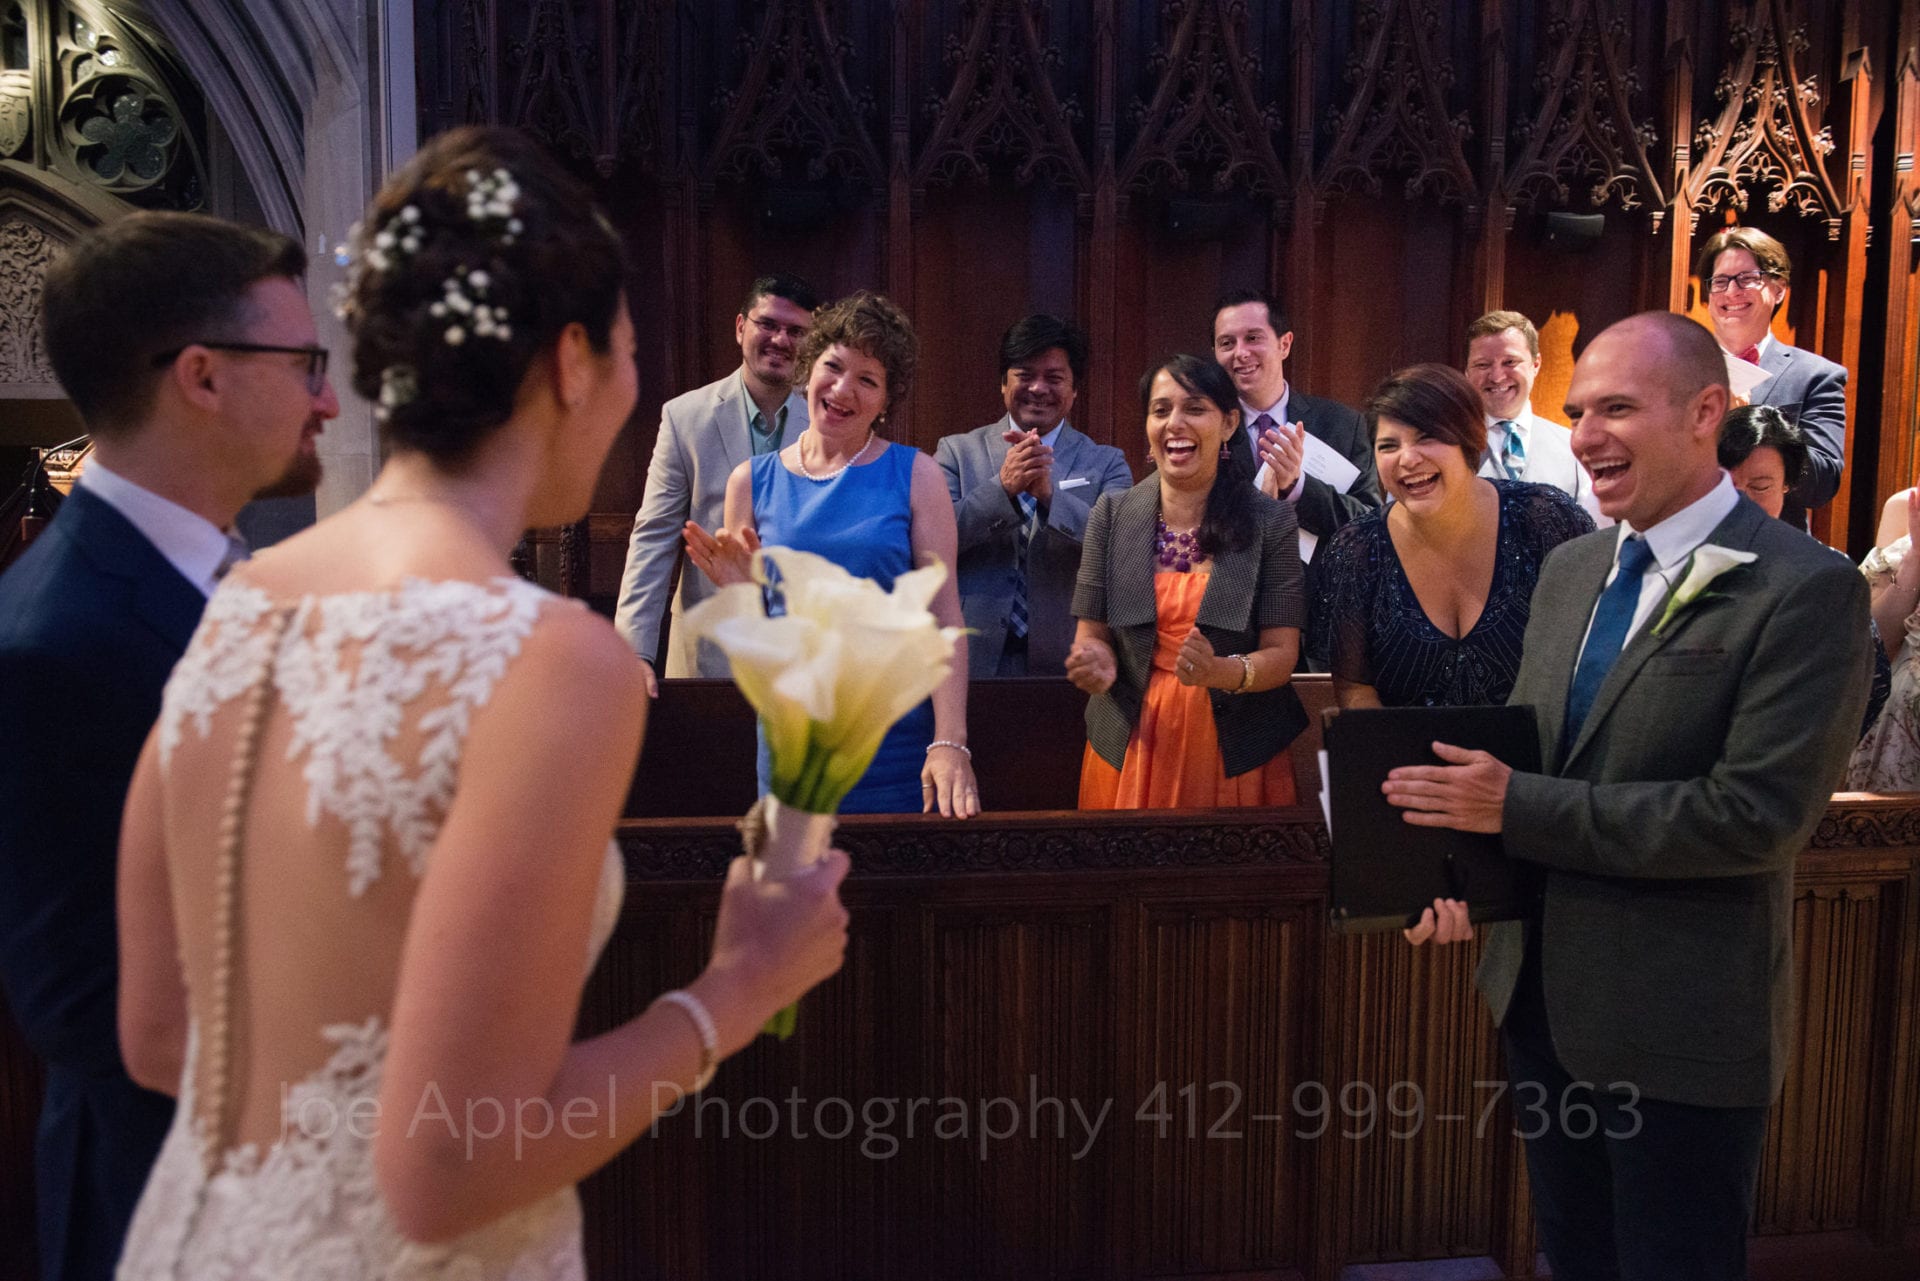 A choir smiles as the bride and groom approach them from the left during their Heinz Chapel and LeMont Wedding.